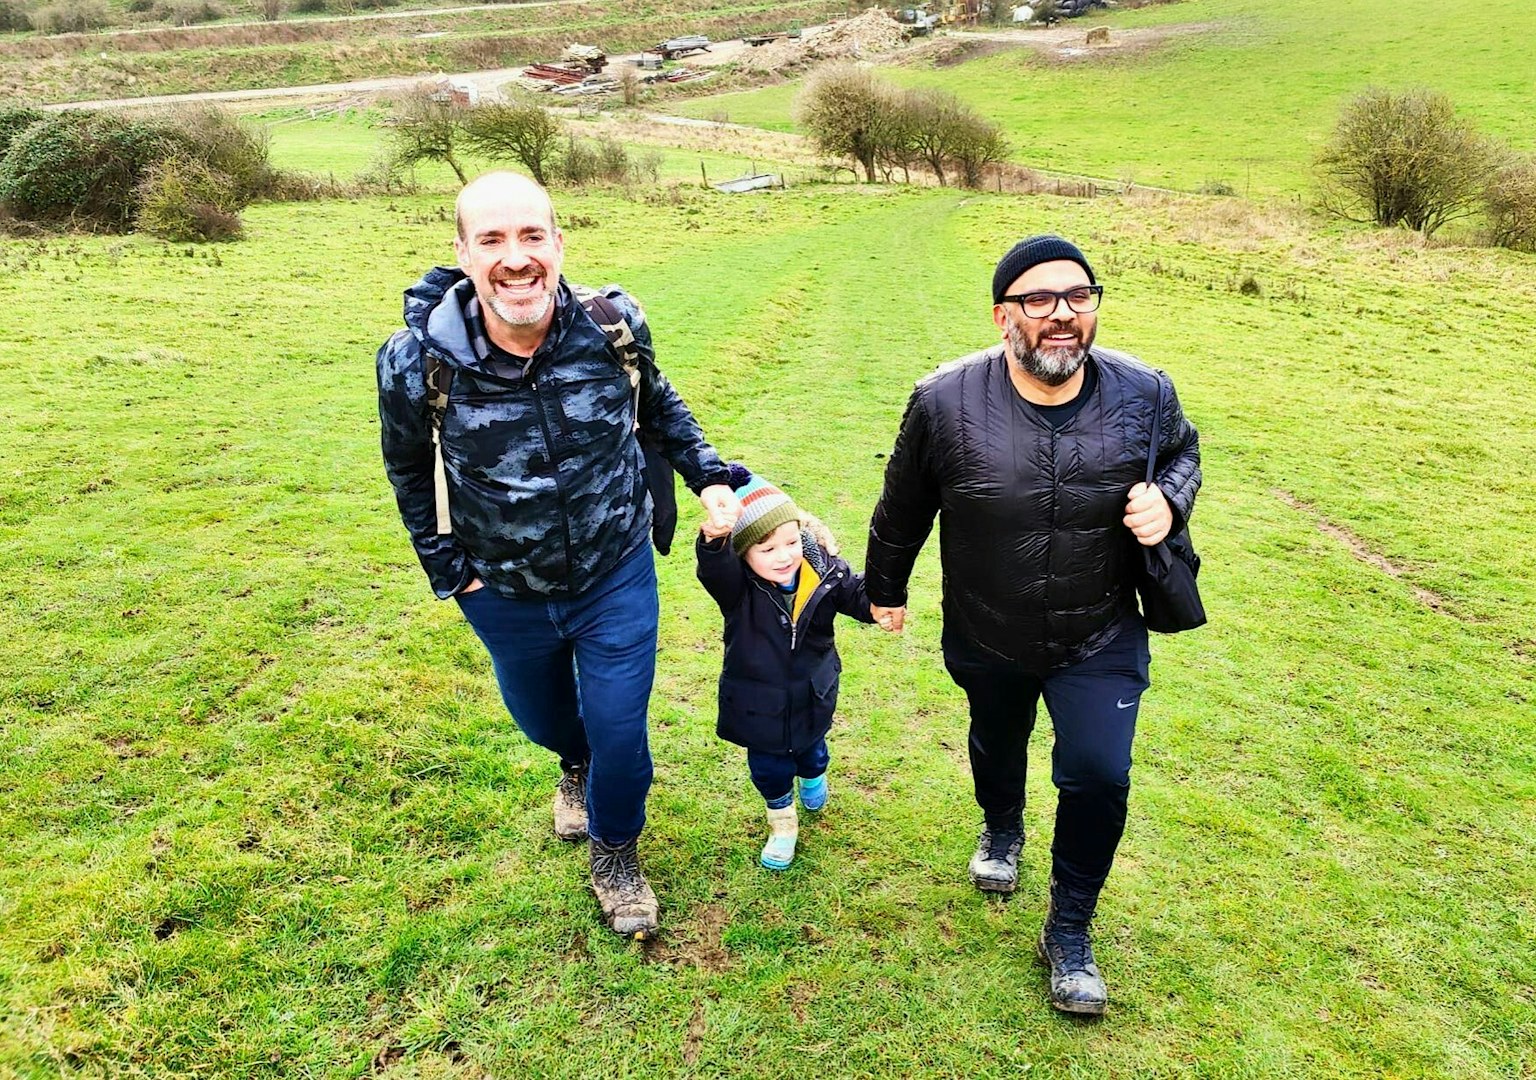 Two team members from Republic of Music on a fundraising hike